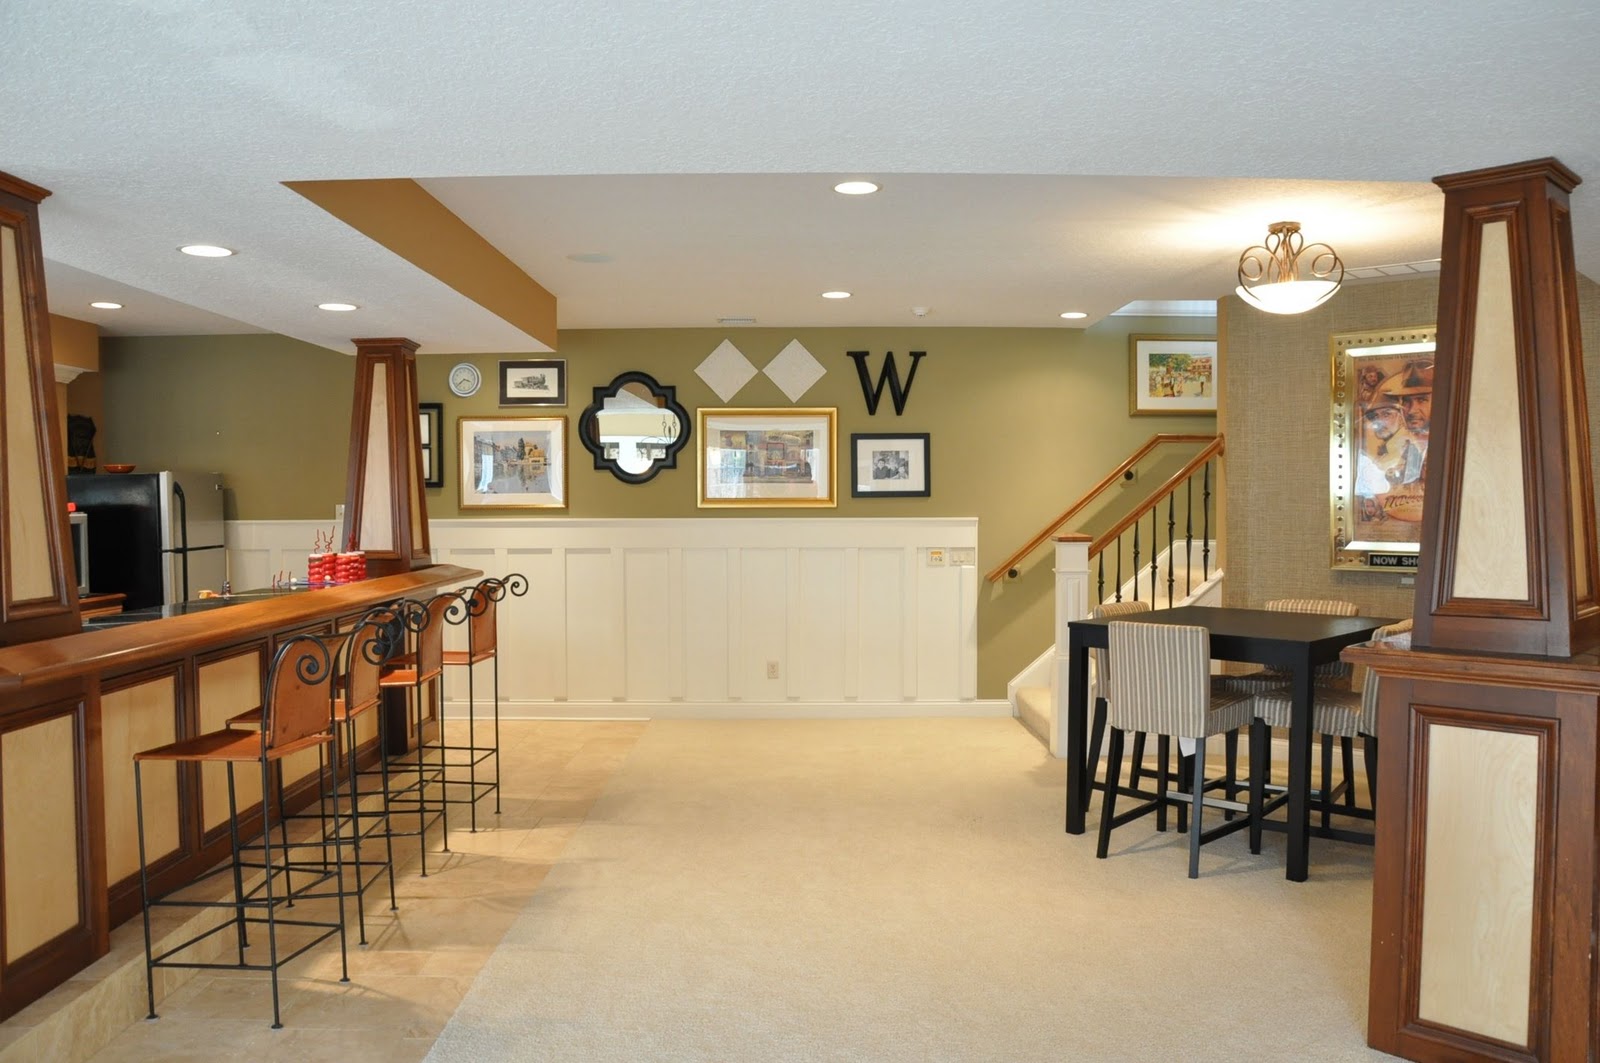 wall colors ideas House Tour - Basement Before & After